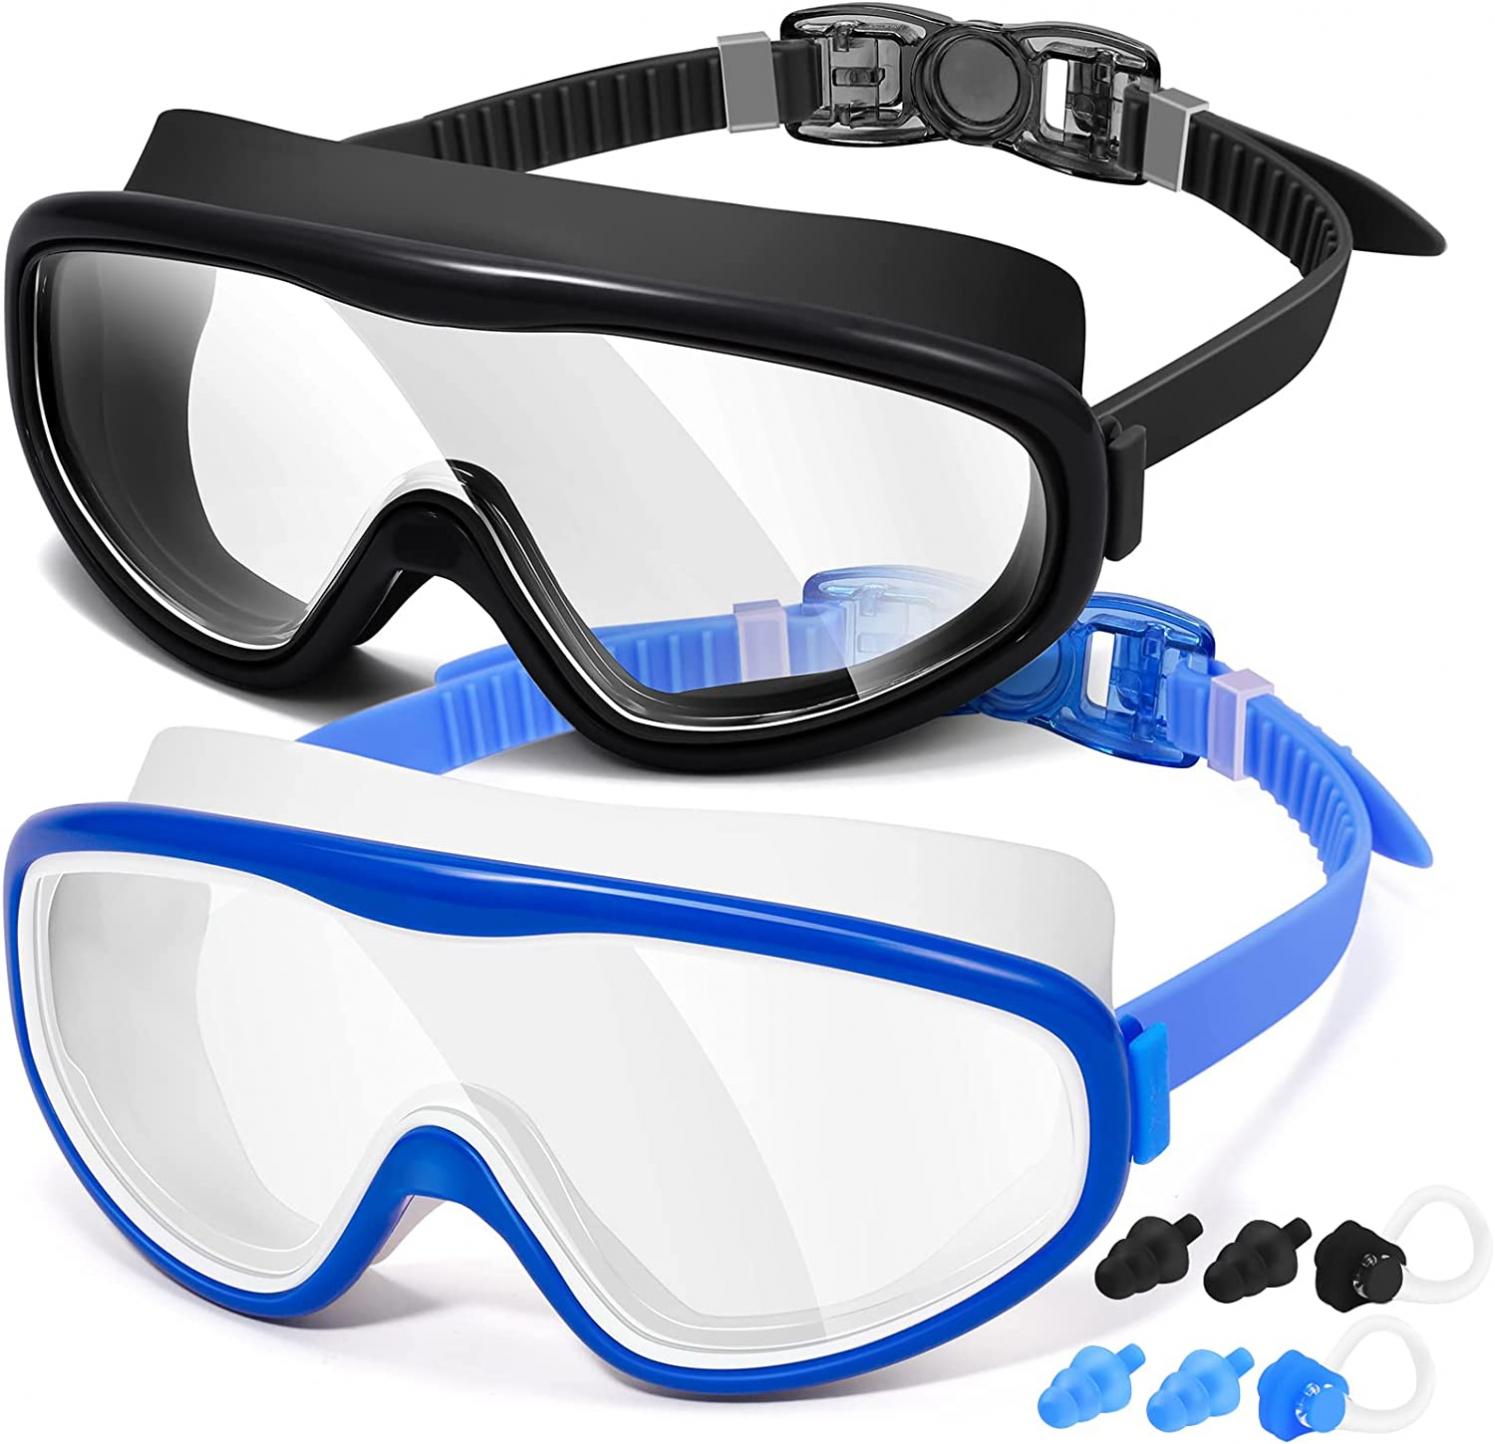 LOEO Swim Goggles Adult 2 Pack-Wide Vision Swimming Goggles for Men Women Youth Teens, No Leaking UV Protection Swim Goggle